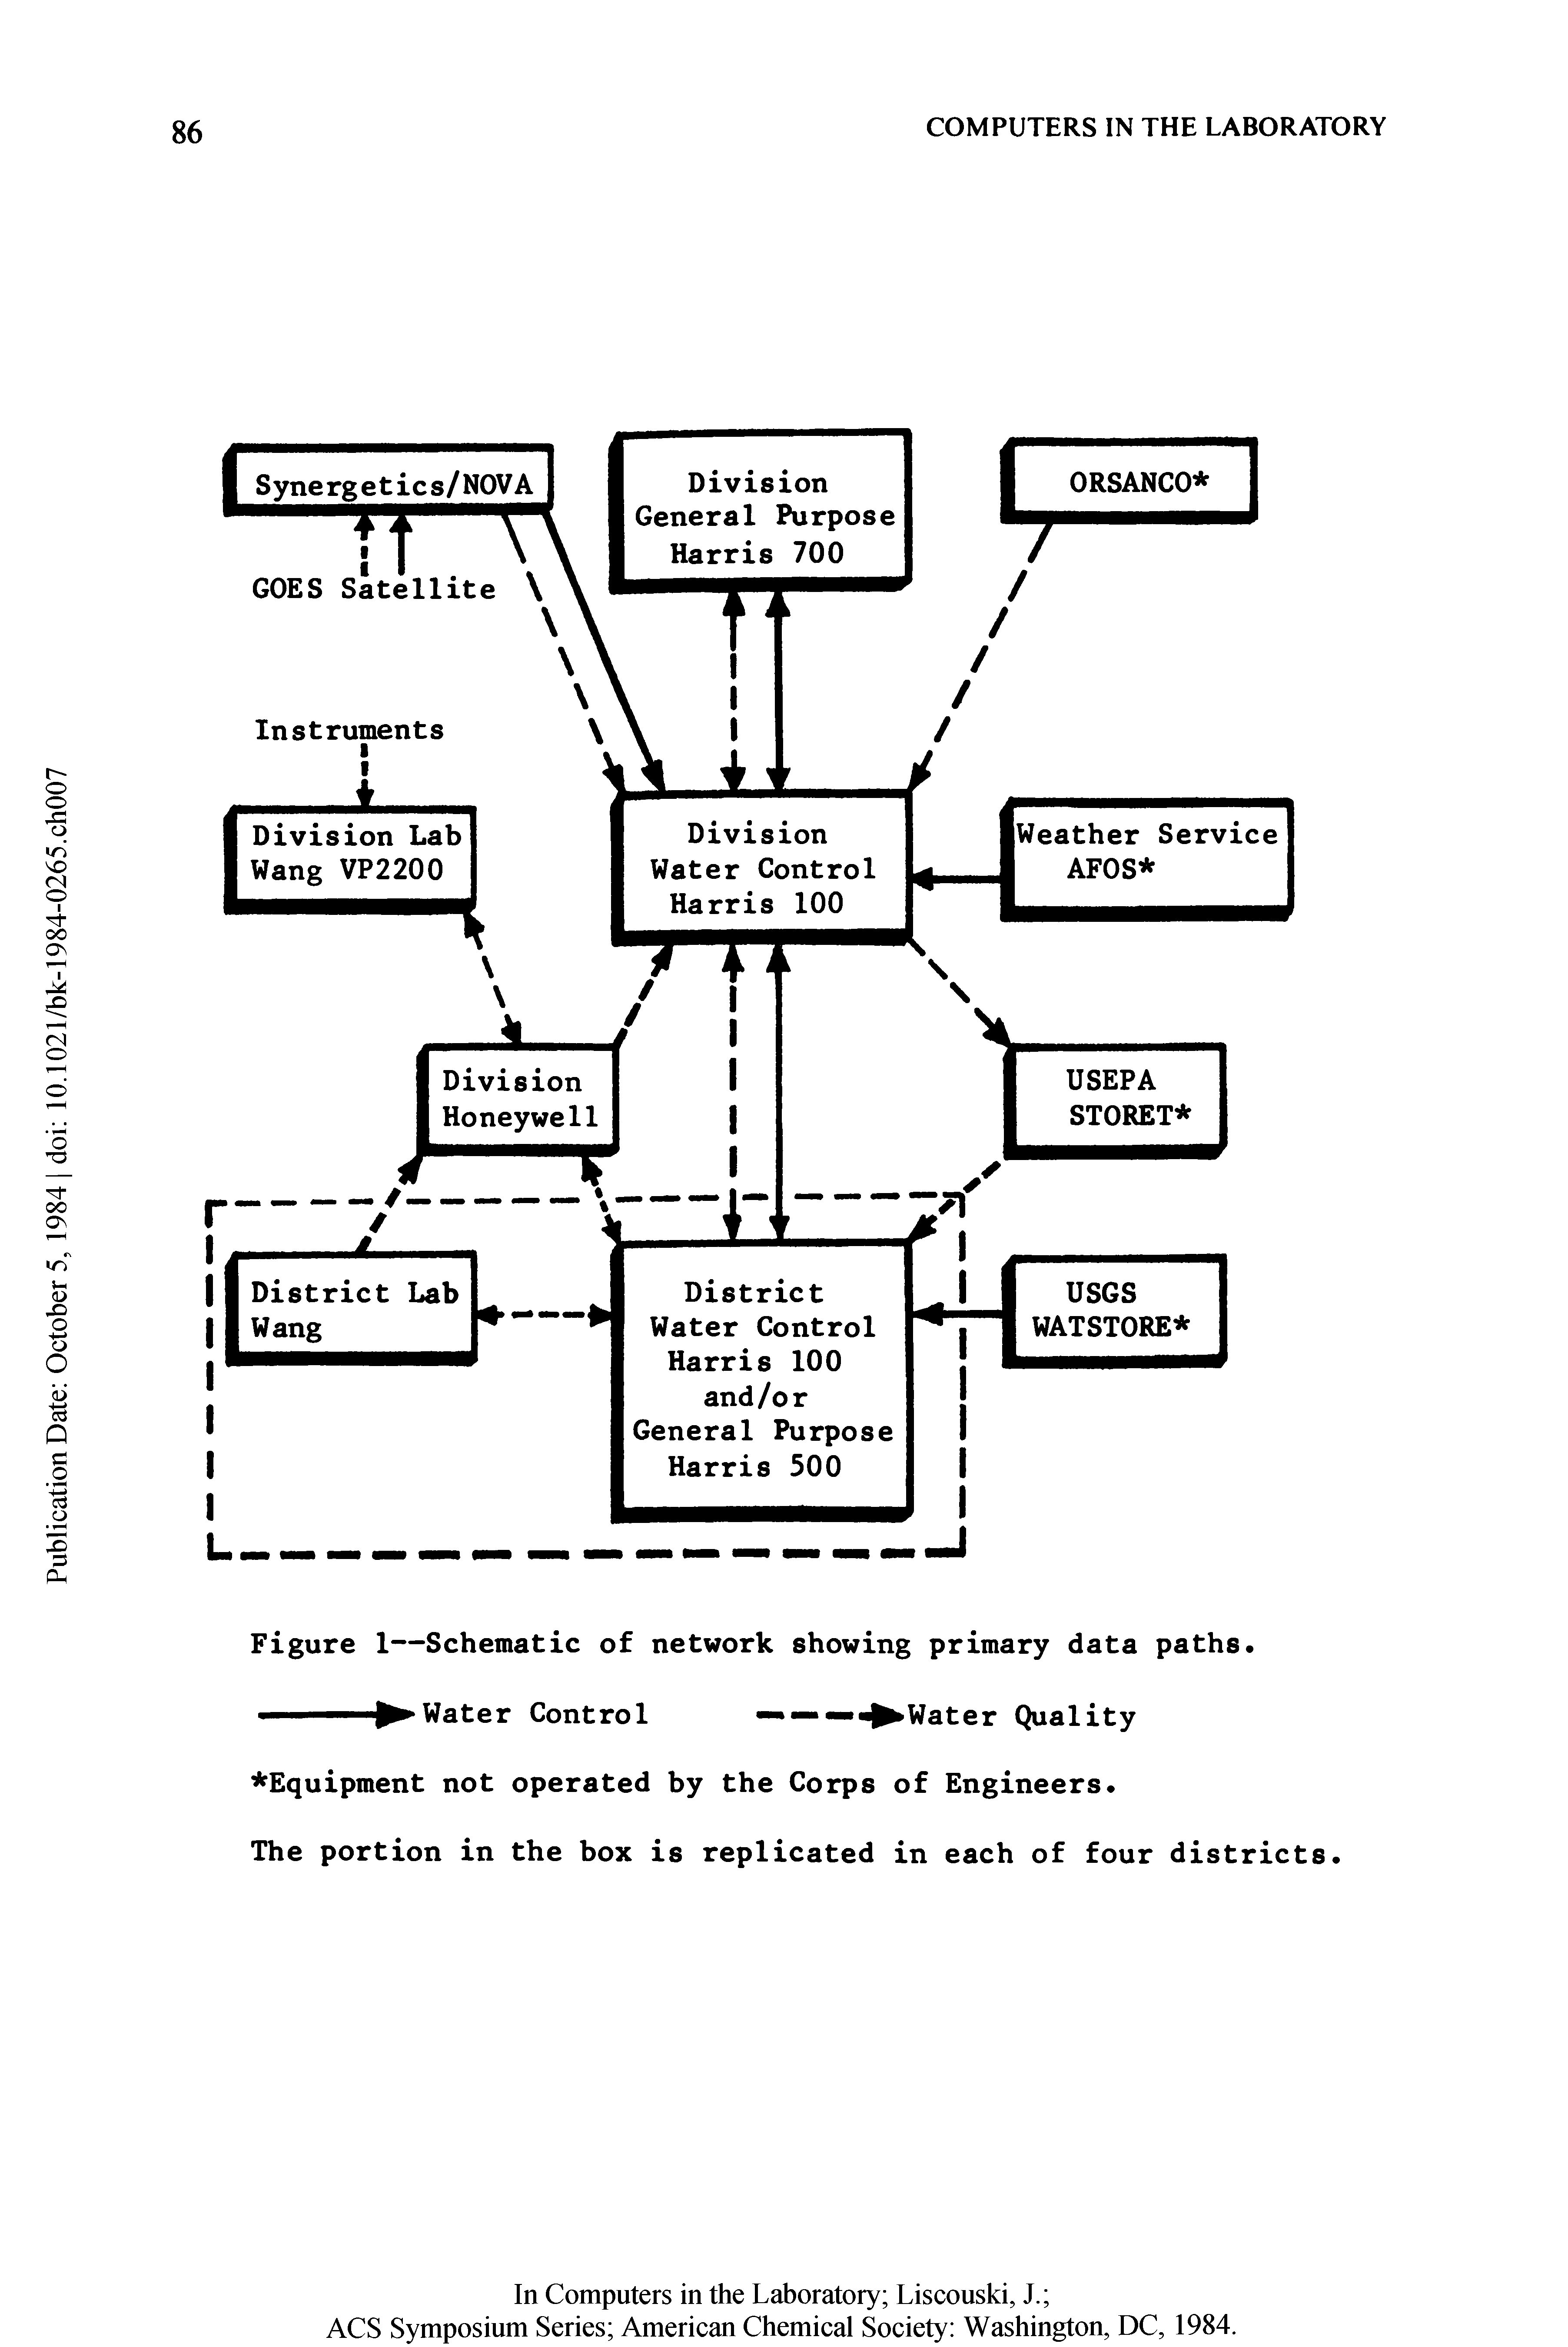 Figure 1—Schematic of network showing primary data paths.